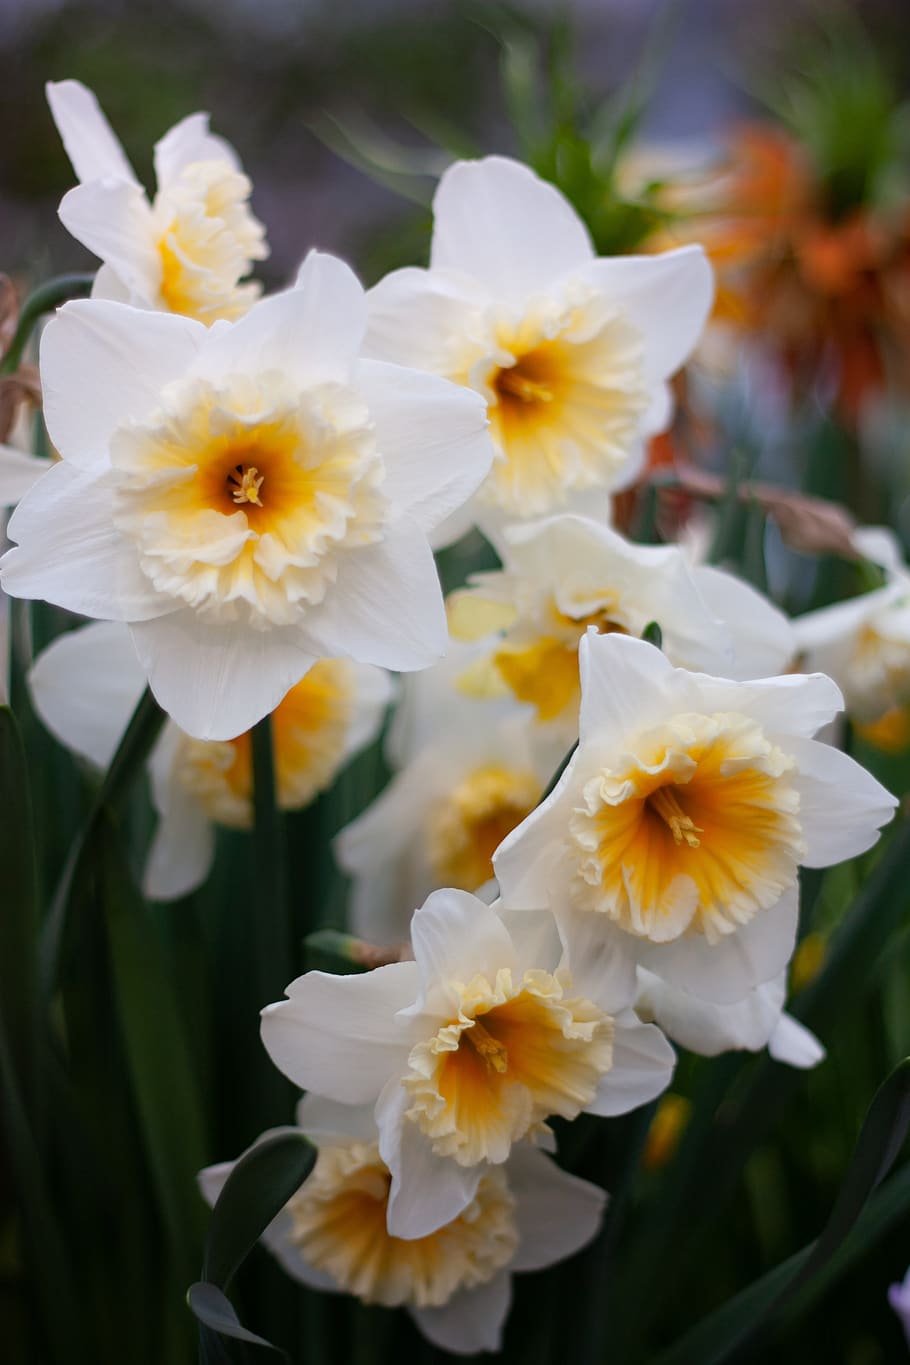 Wallpaper ID 363962  Earth Daffodil Phone Wallpaper Spring Nature  White Flower Flower 1080x2340 free download